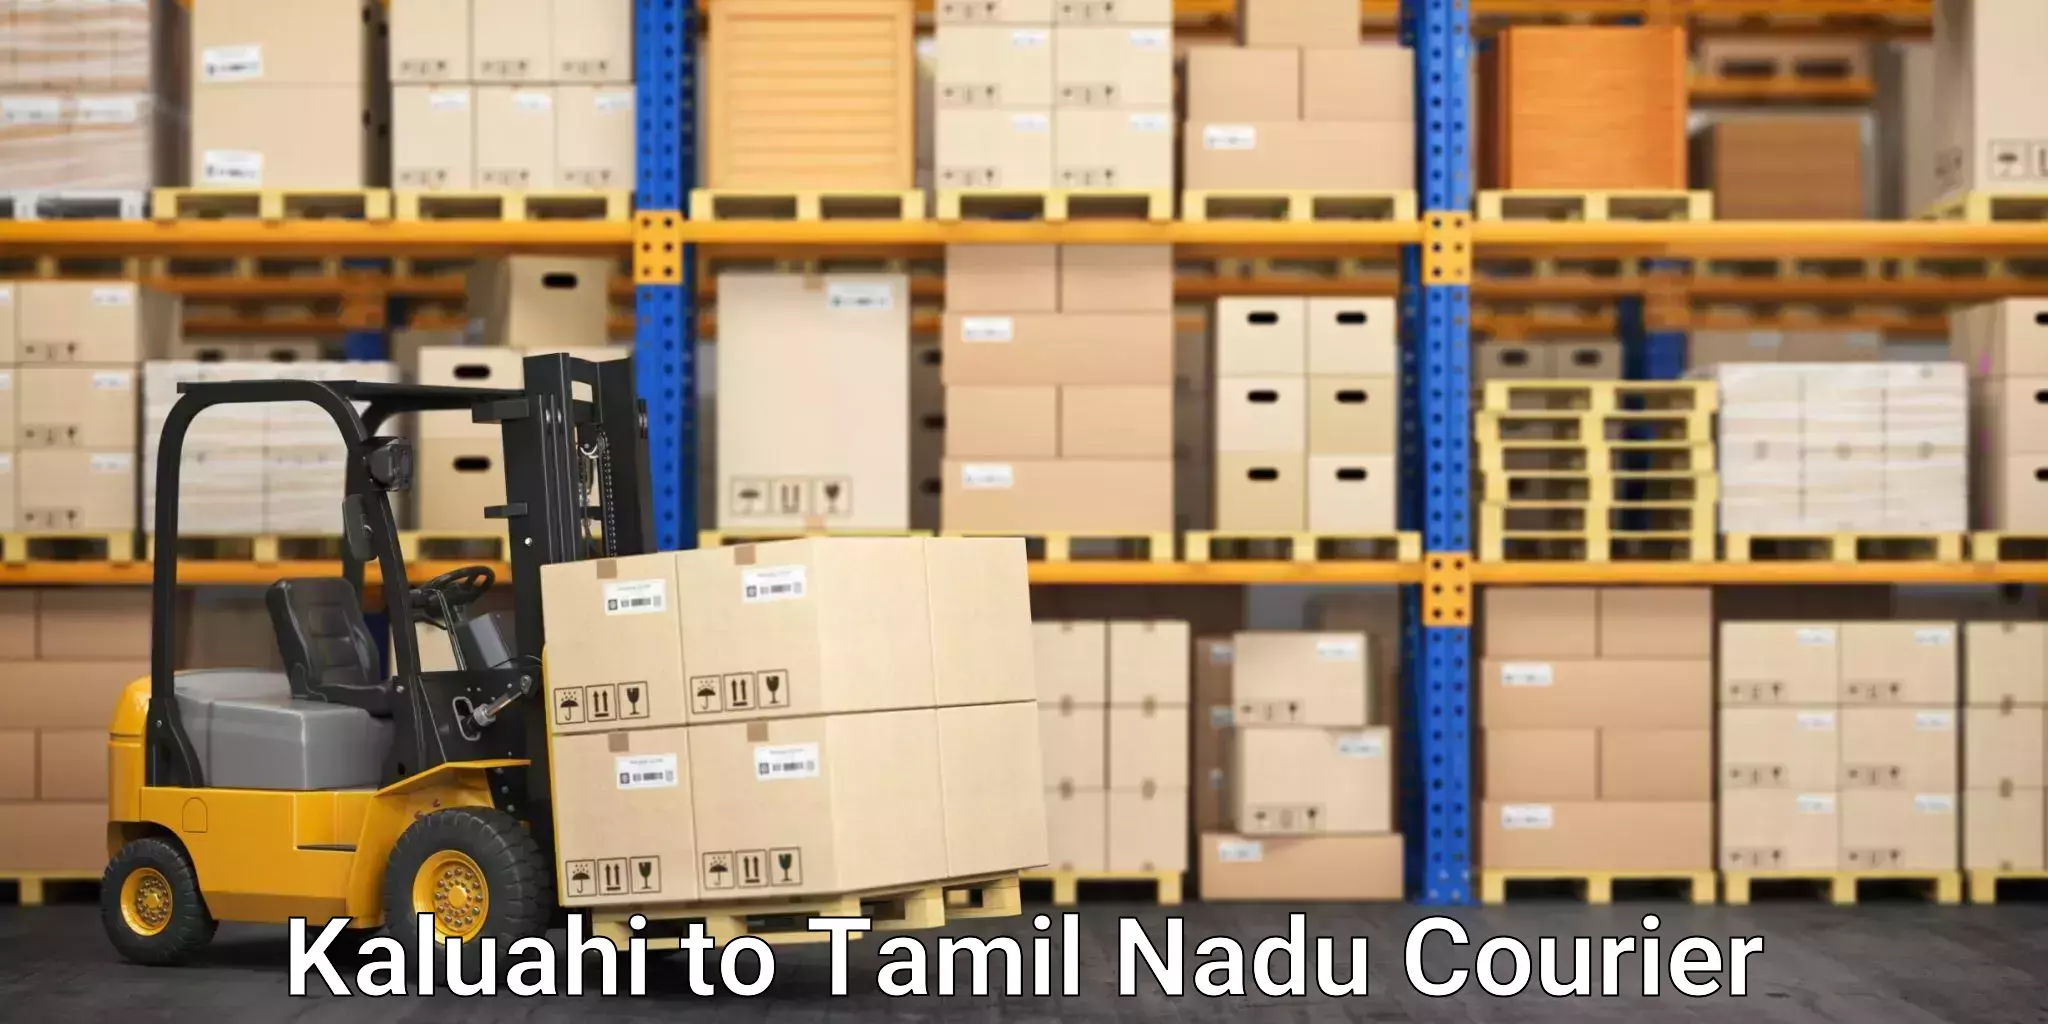 Moving and handling services Kaluahi to Tamil Nadu